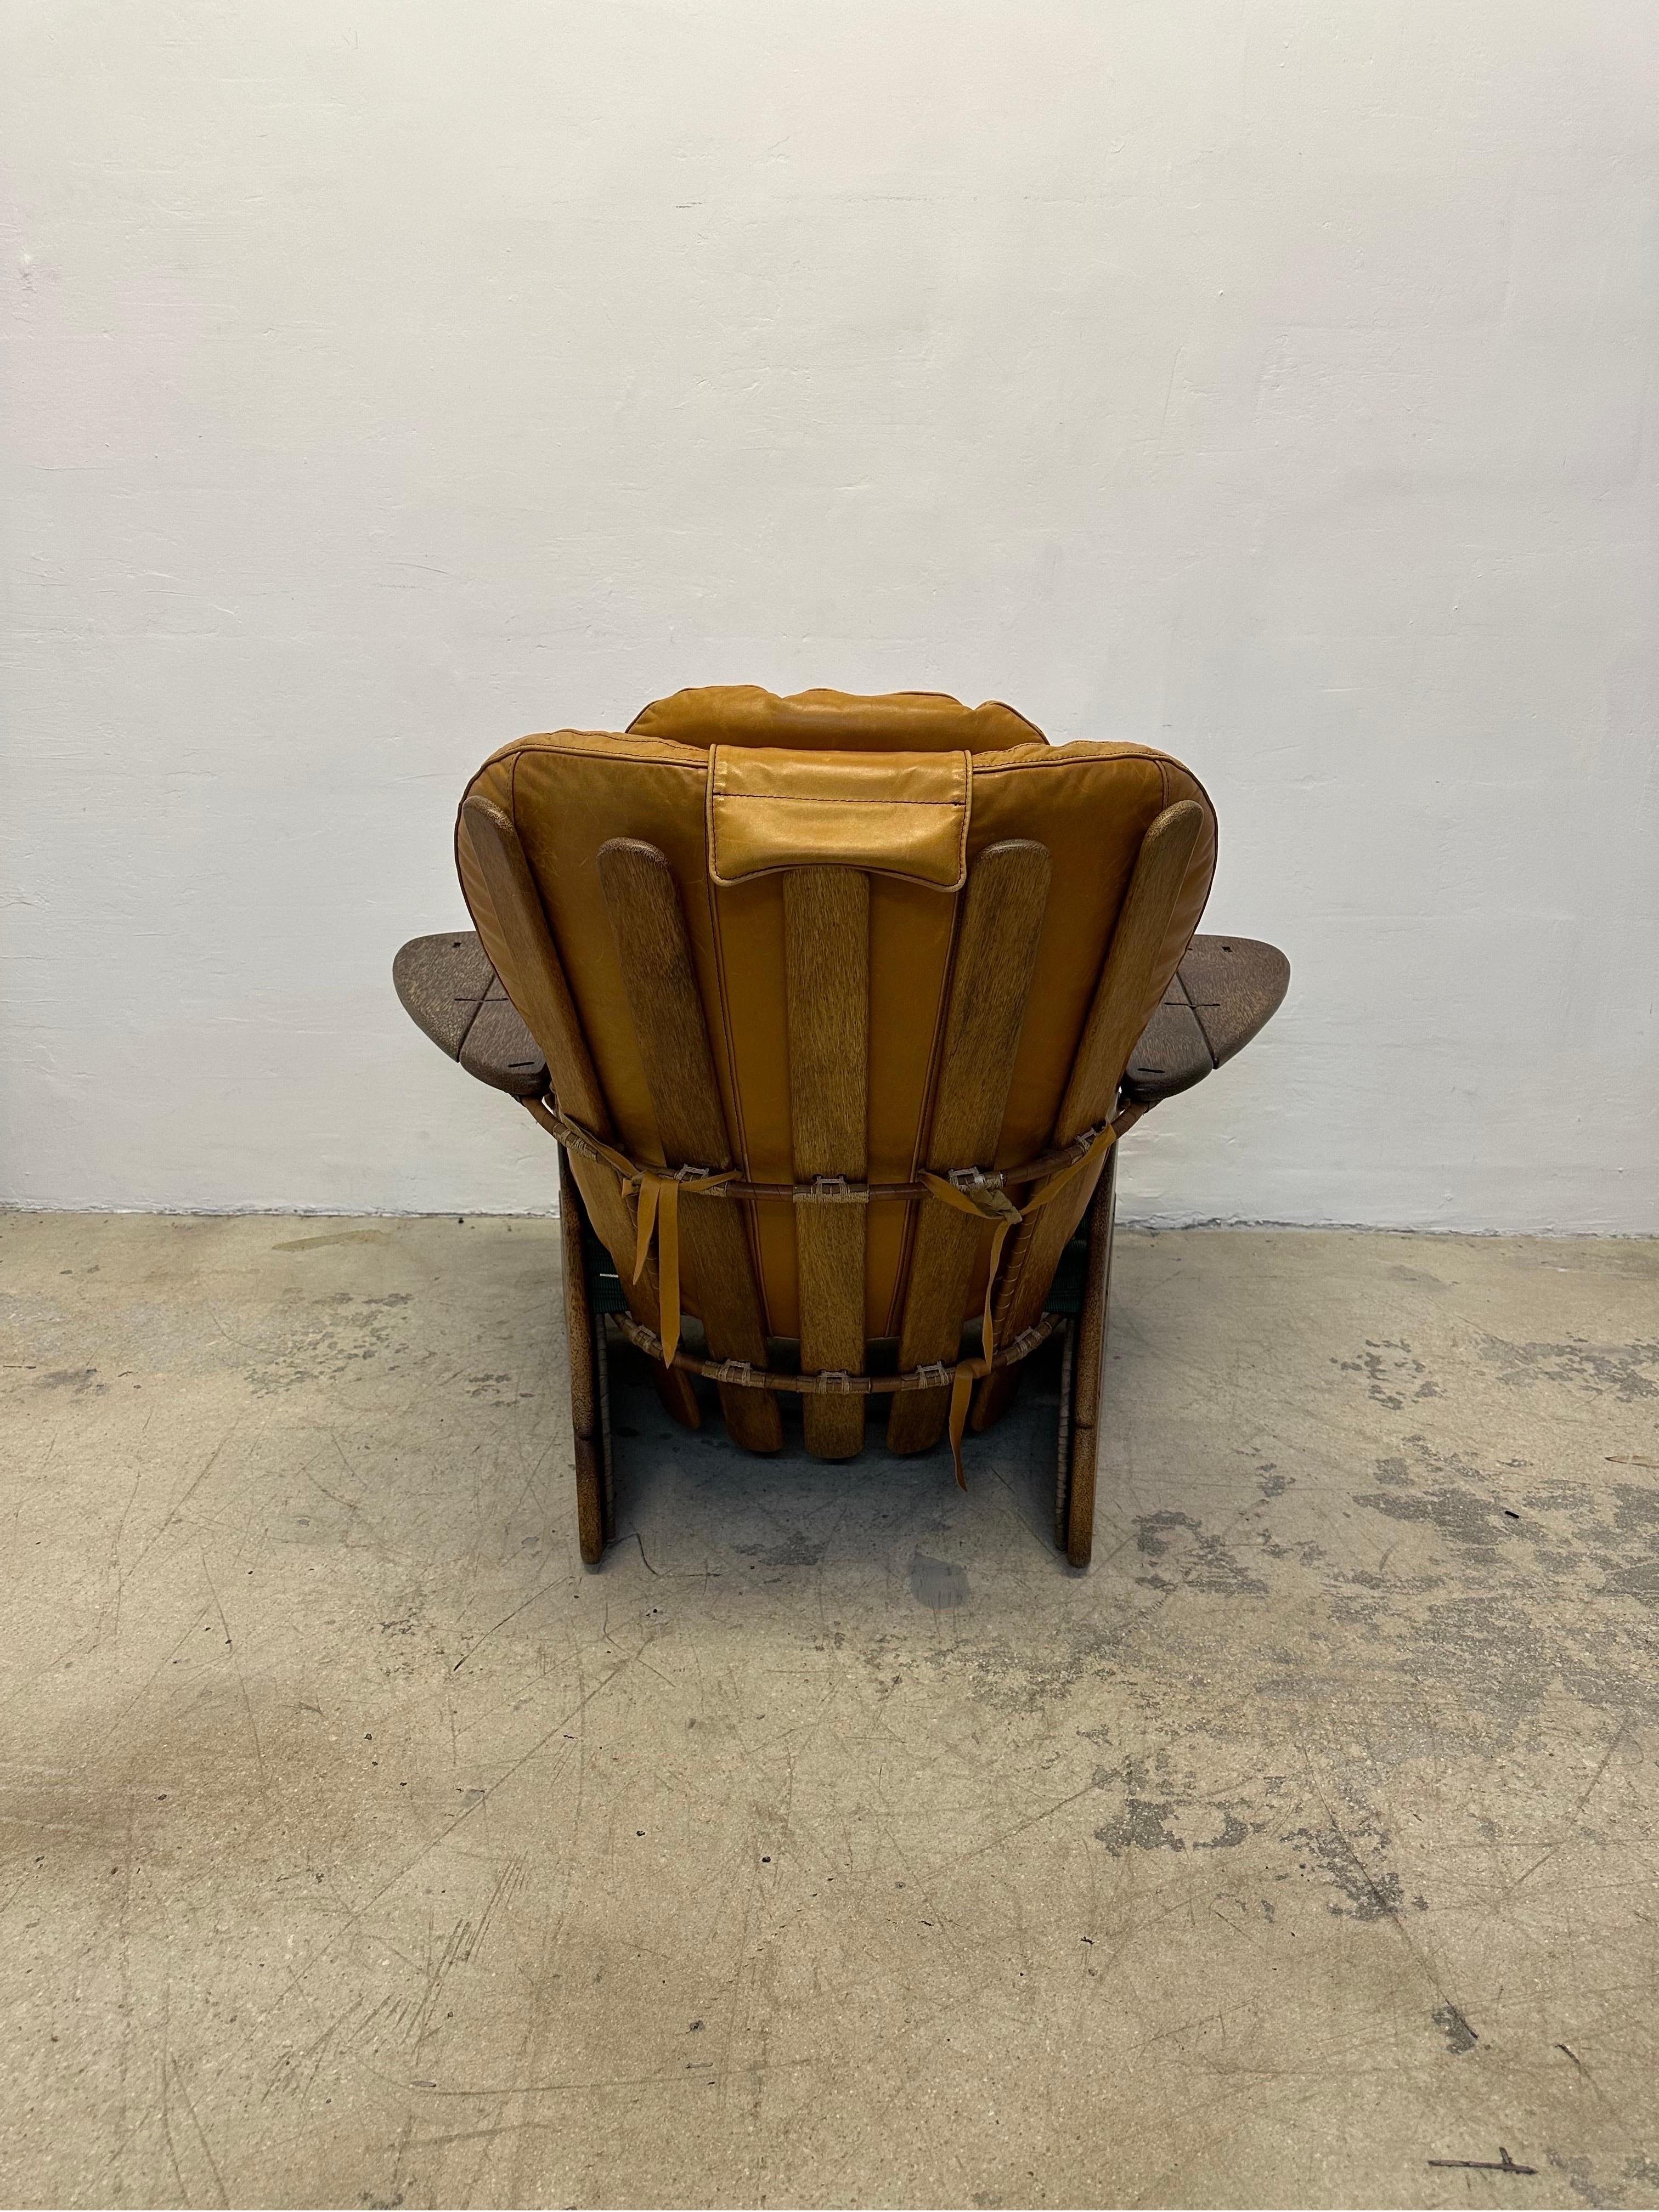 Pacific Green Havana Palmwood and Leather Lounge Chair In Good Condition For Sale In Miami, FL